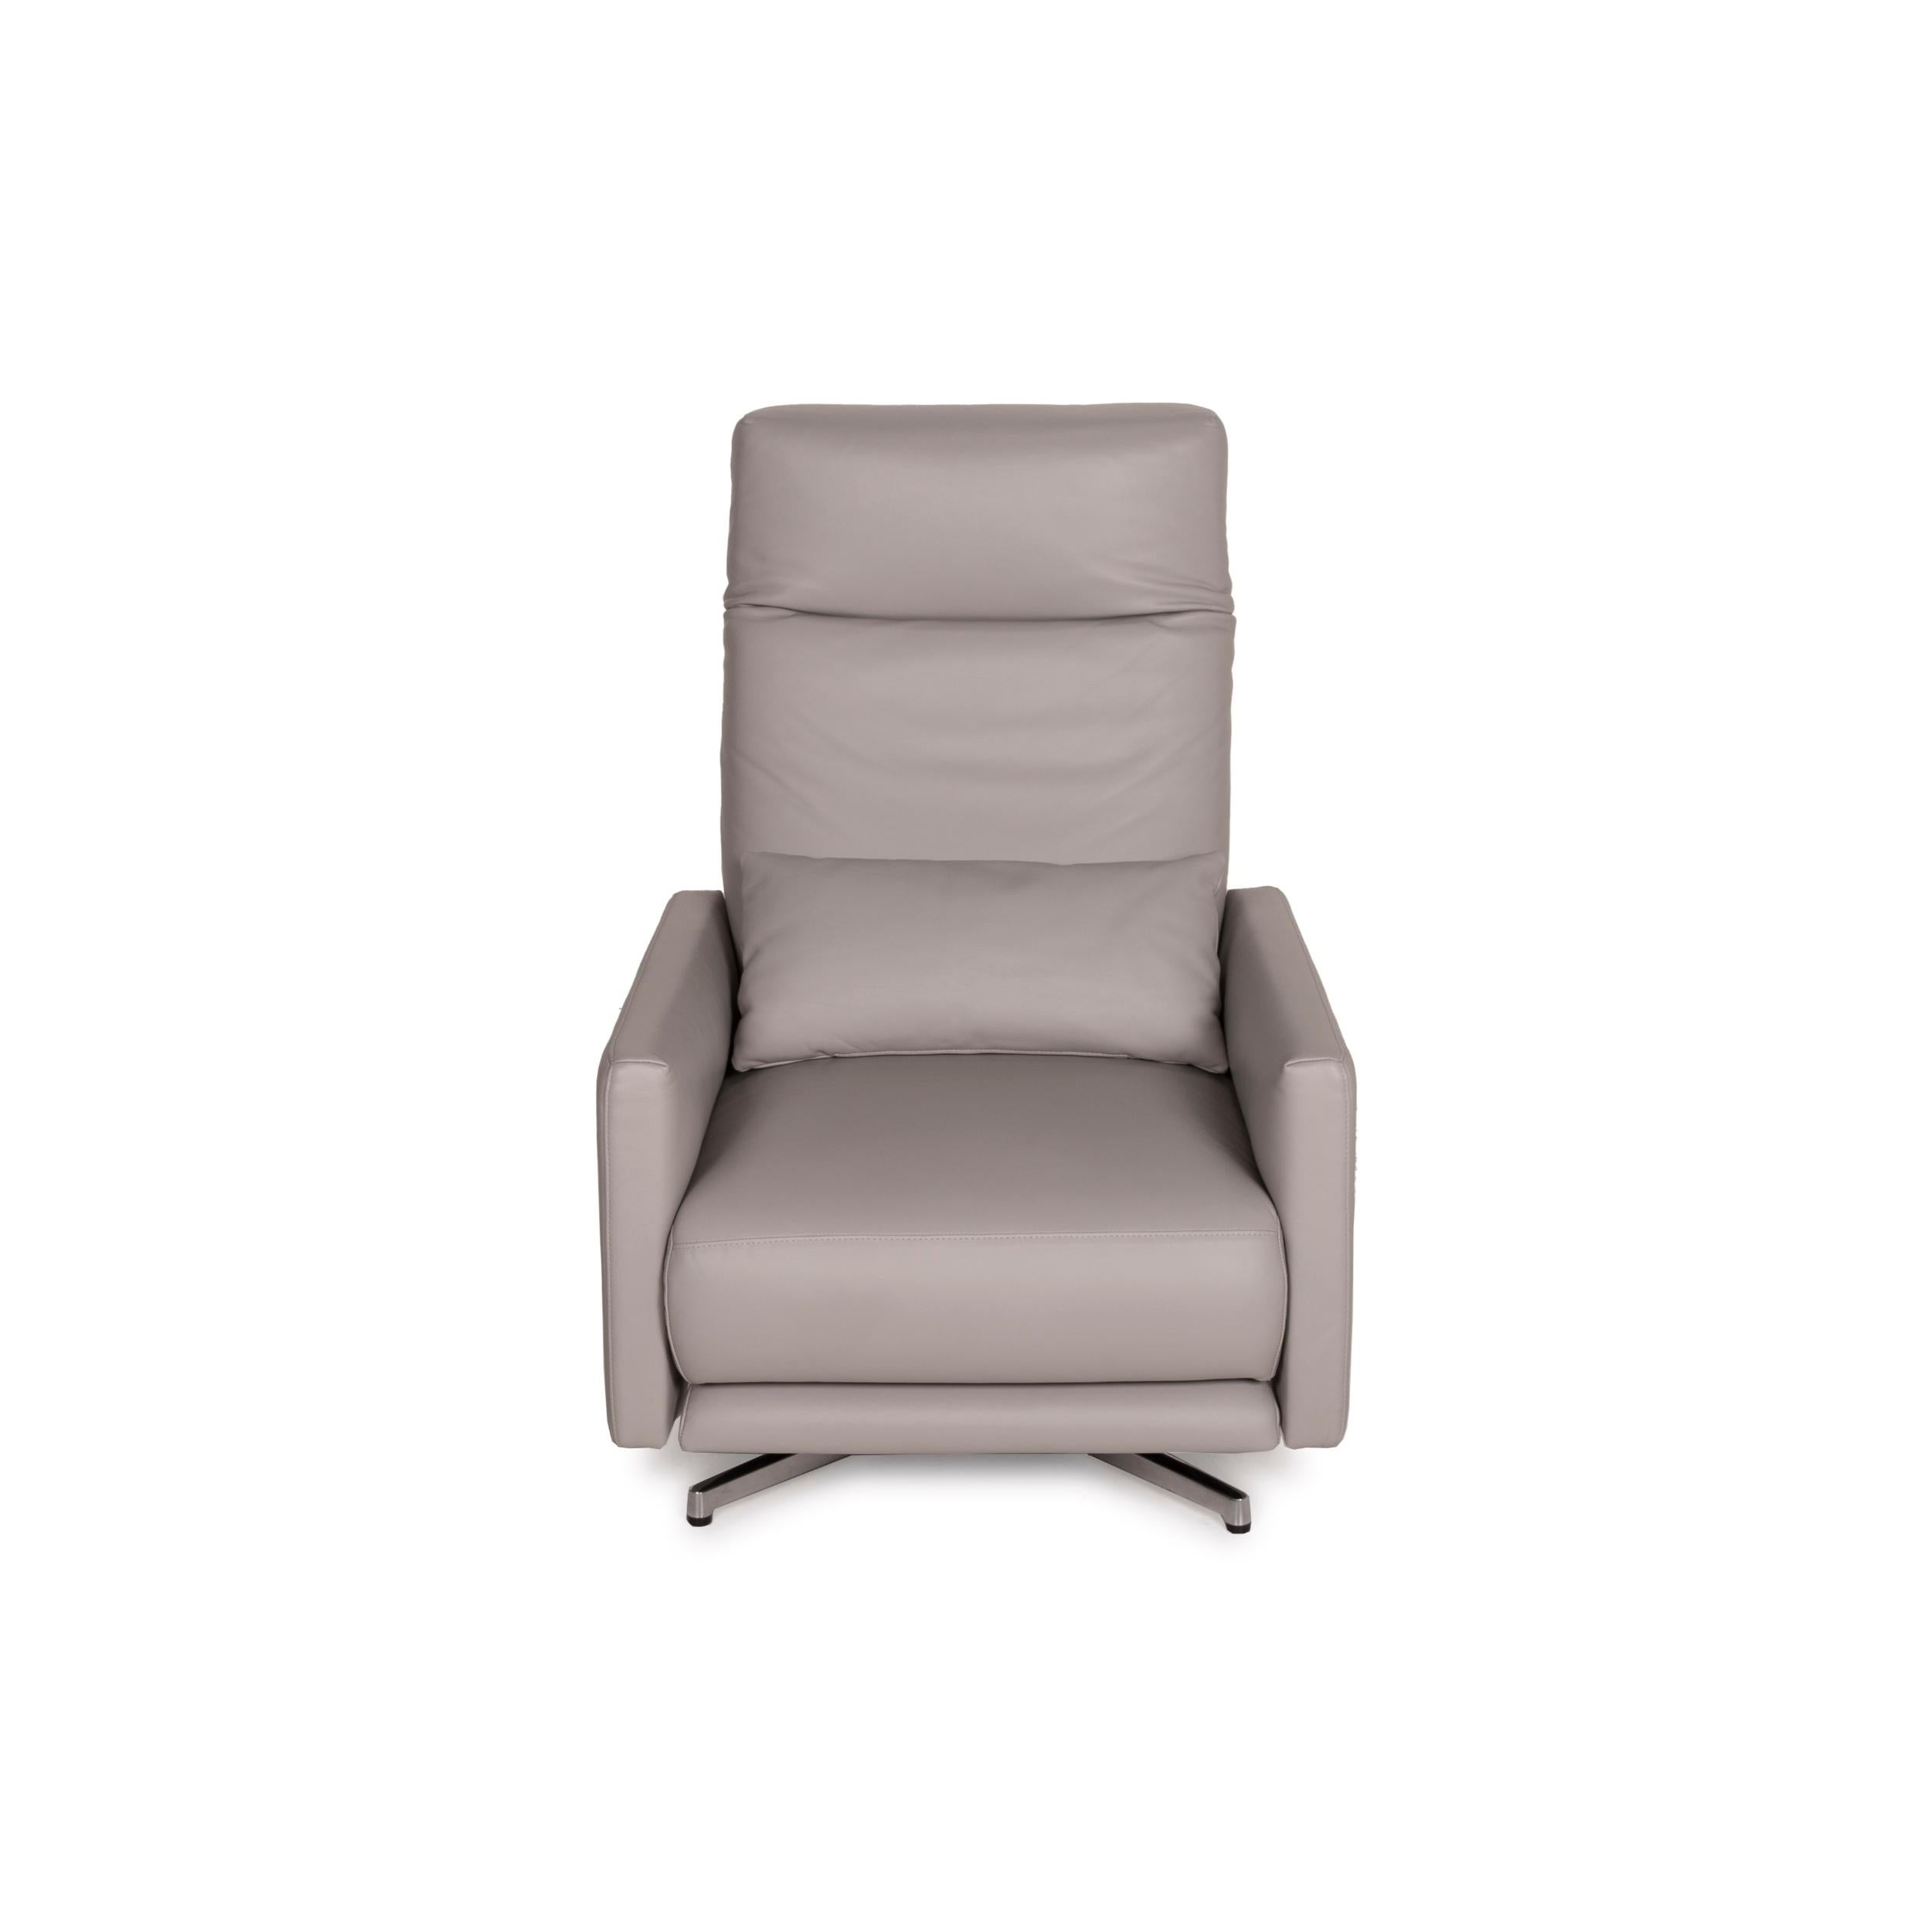 Rolf Benz 574 Leather Armchair Gray Relax Function 2